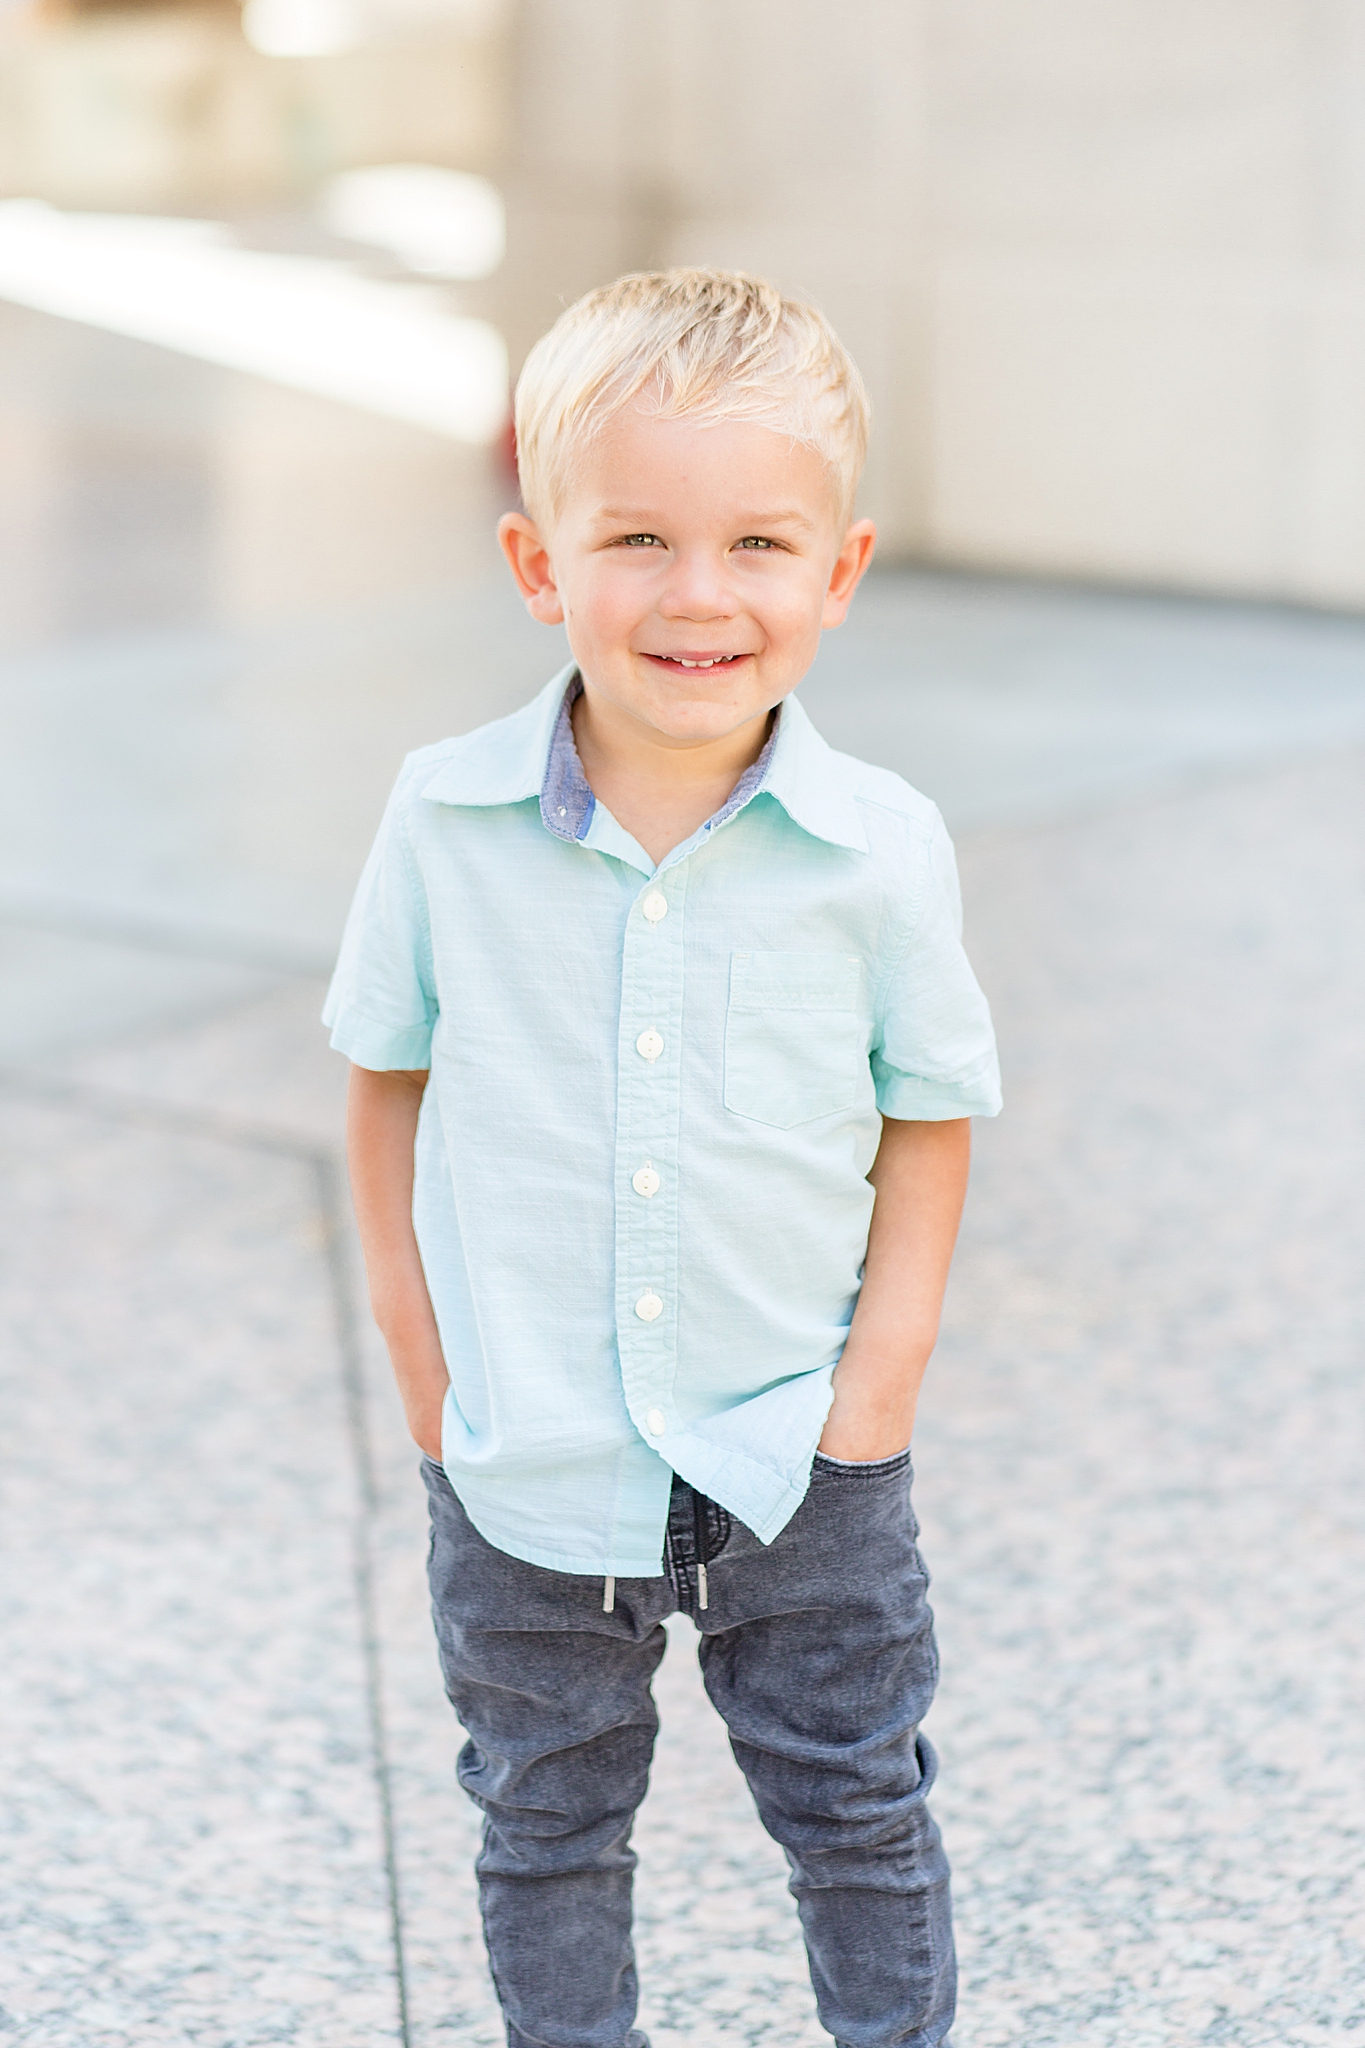 toddler poses with hands in pockets while wearing blue shirt